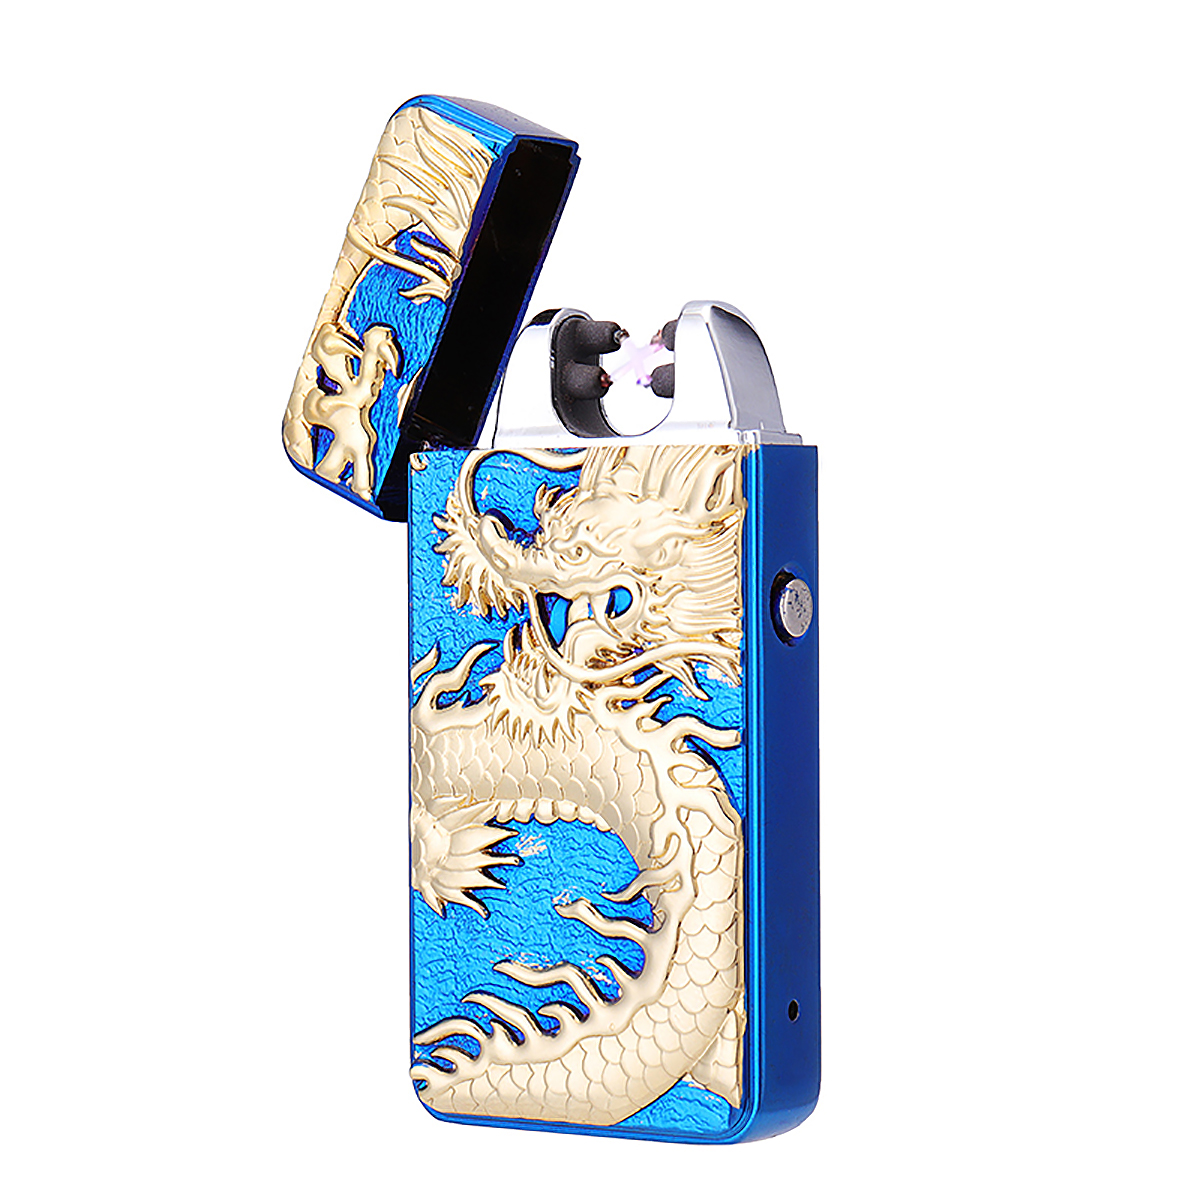 

KCASA KC-8013 Dragon Emboss Double Pulsed Arc USB Rechargeable Lighter Creative Design Ignitor Starter BBQ Electric Lighter